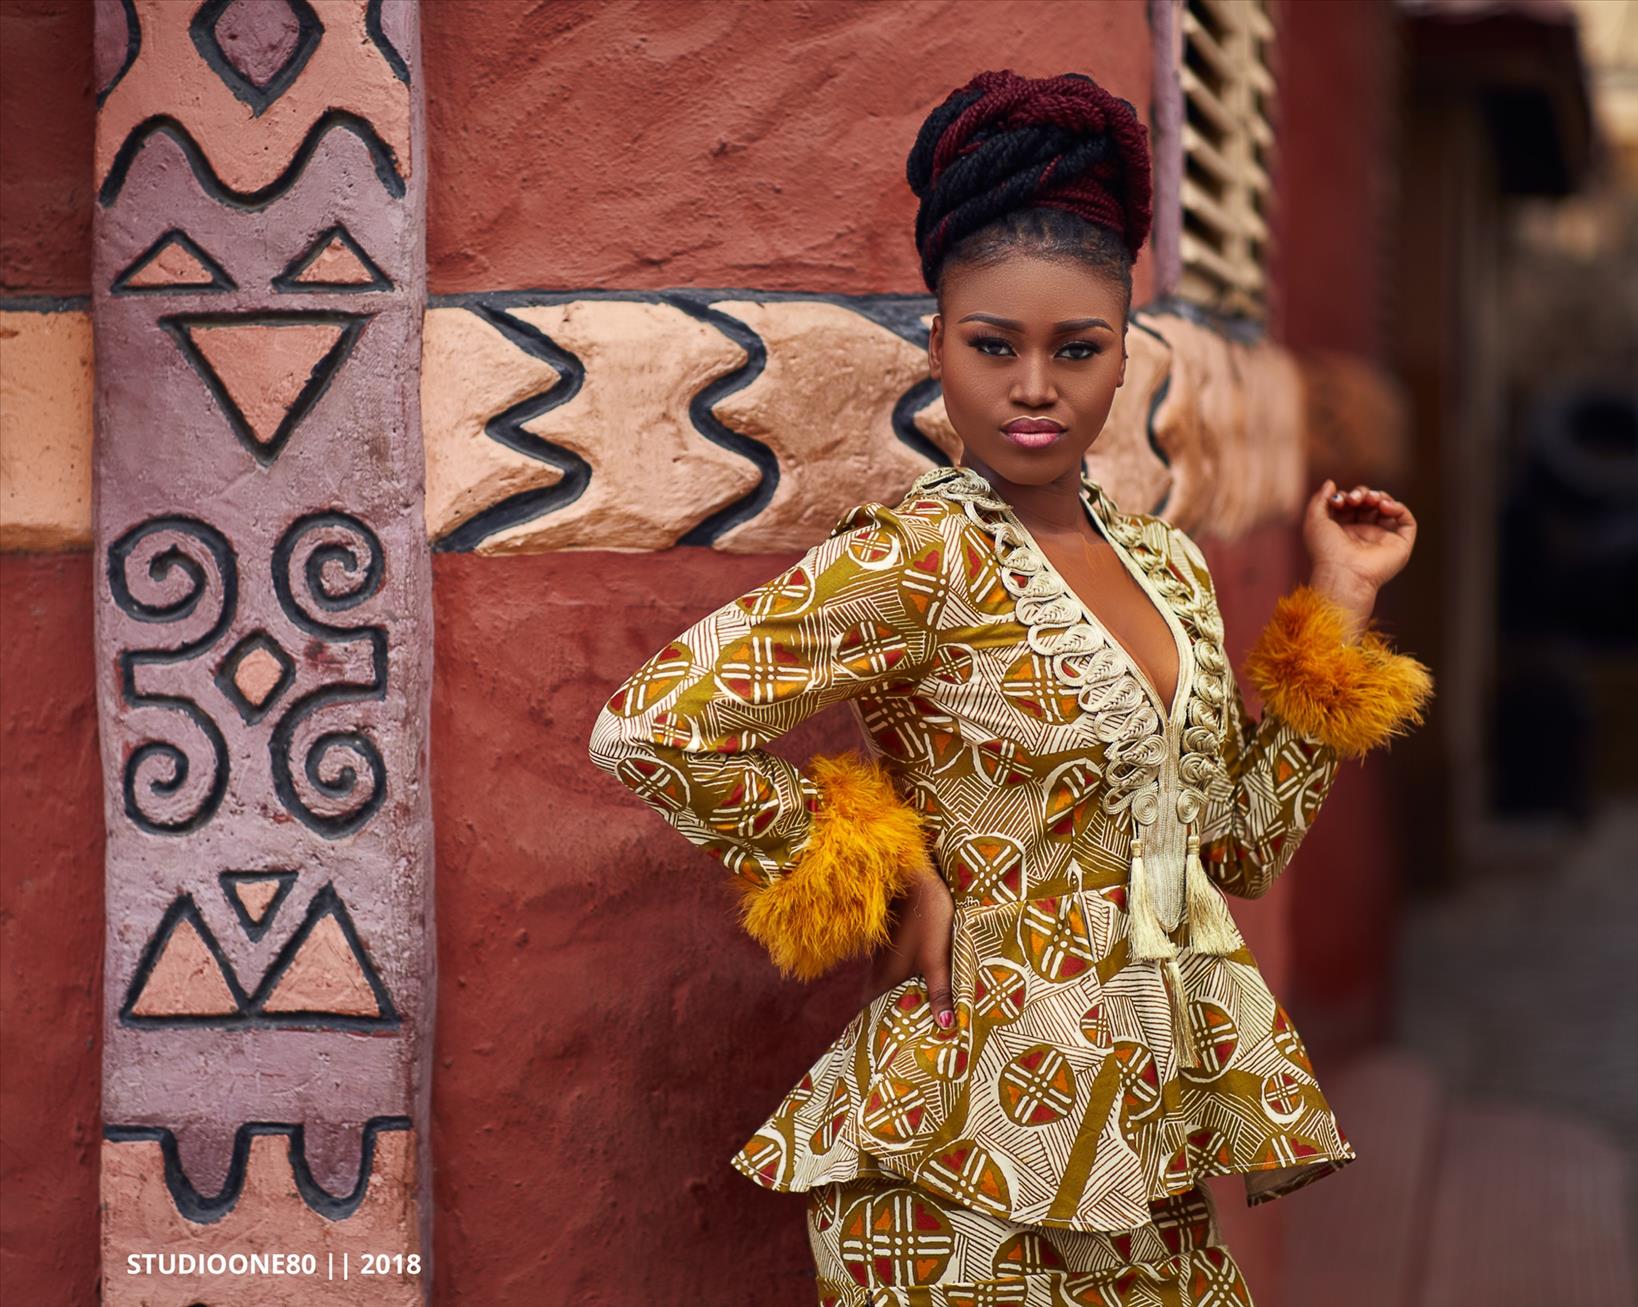 “There are too many young Nigerian Women engaging in prostitution in Ghana” – eShun